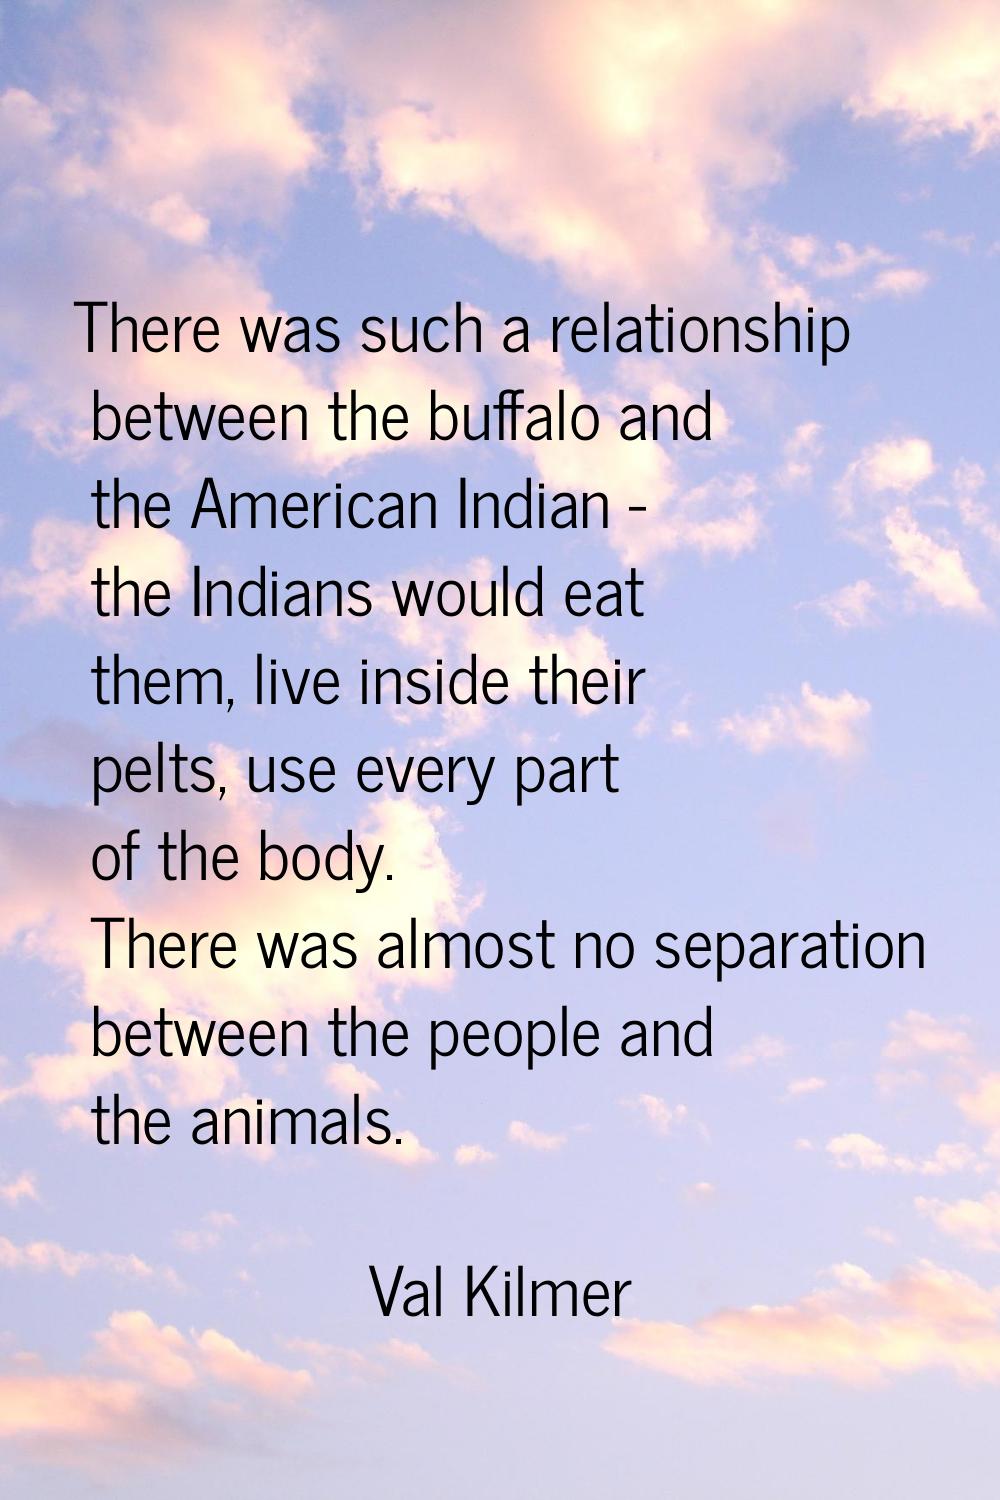 There was such a relationship between the buffalo and the American Indian - the Indians would eat t